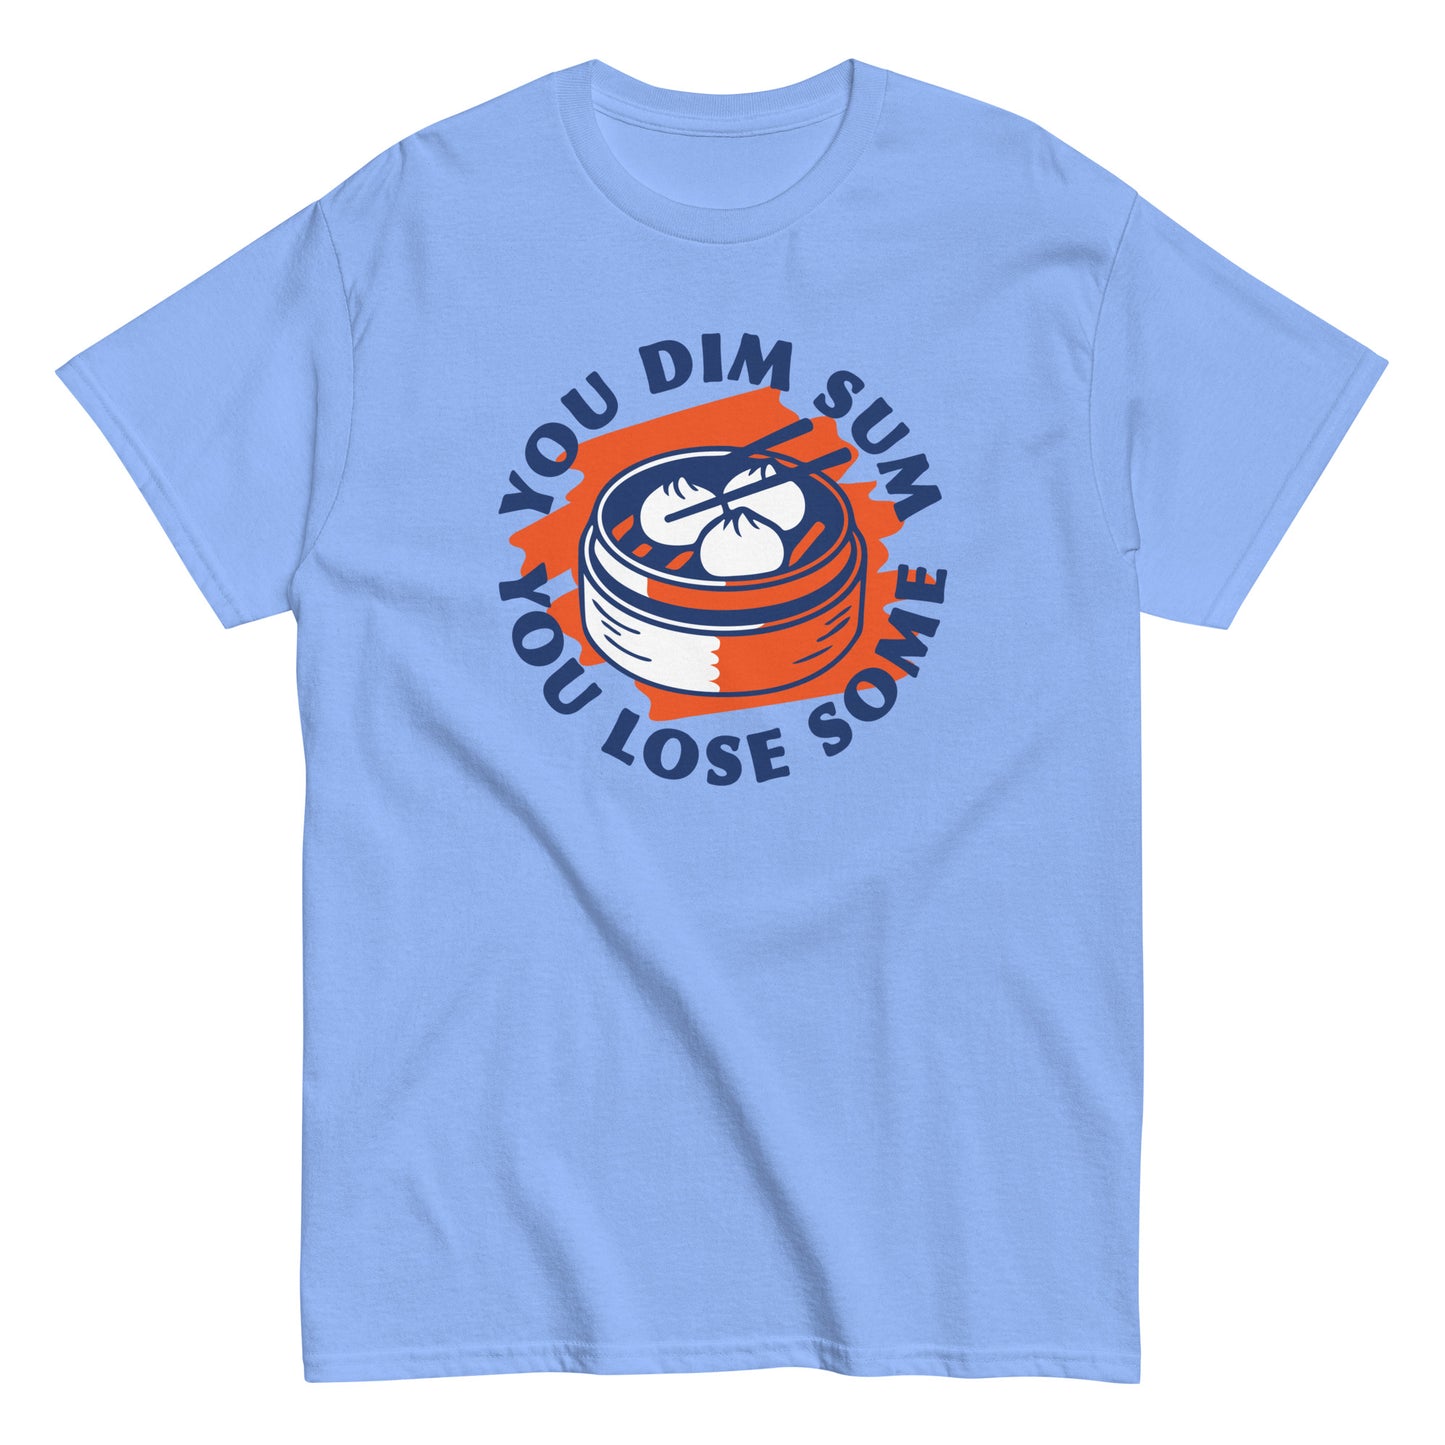 You Dim Sum You Lose Some Men's Classic Tee